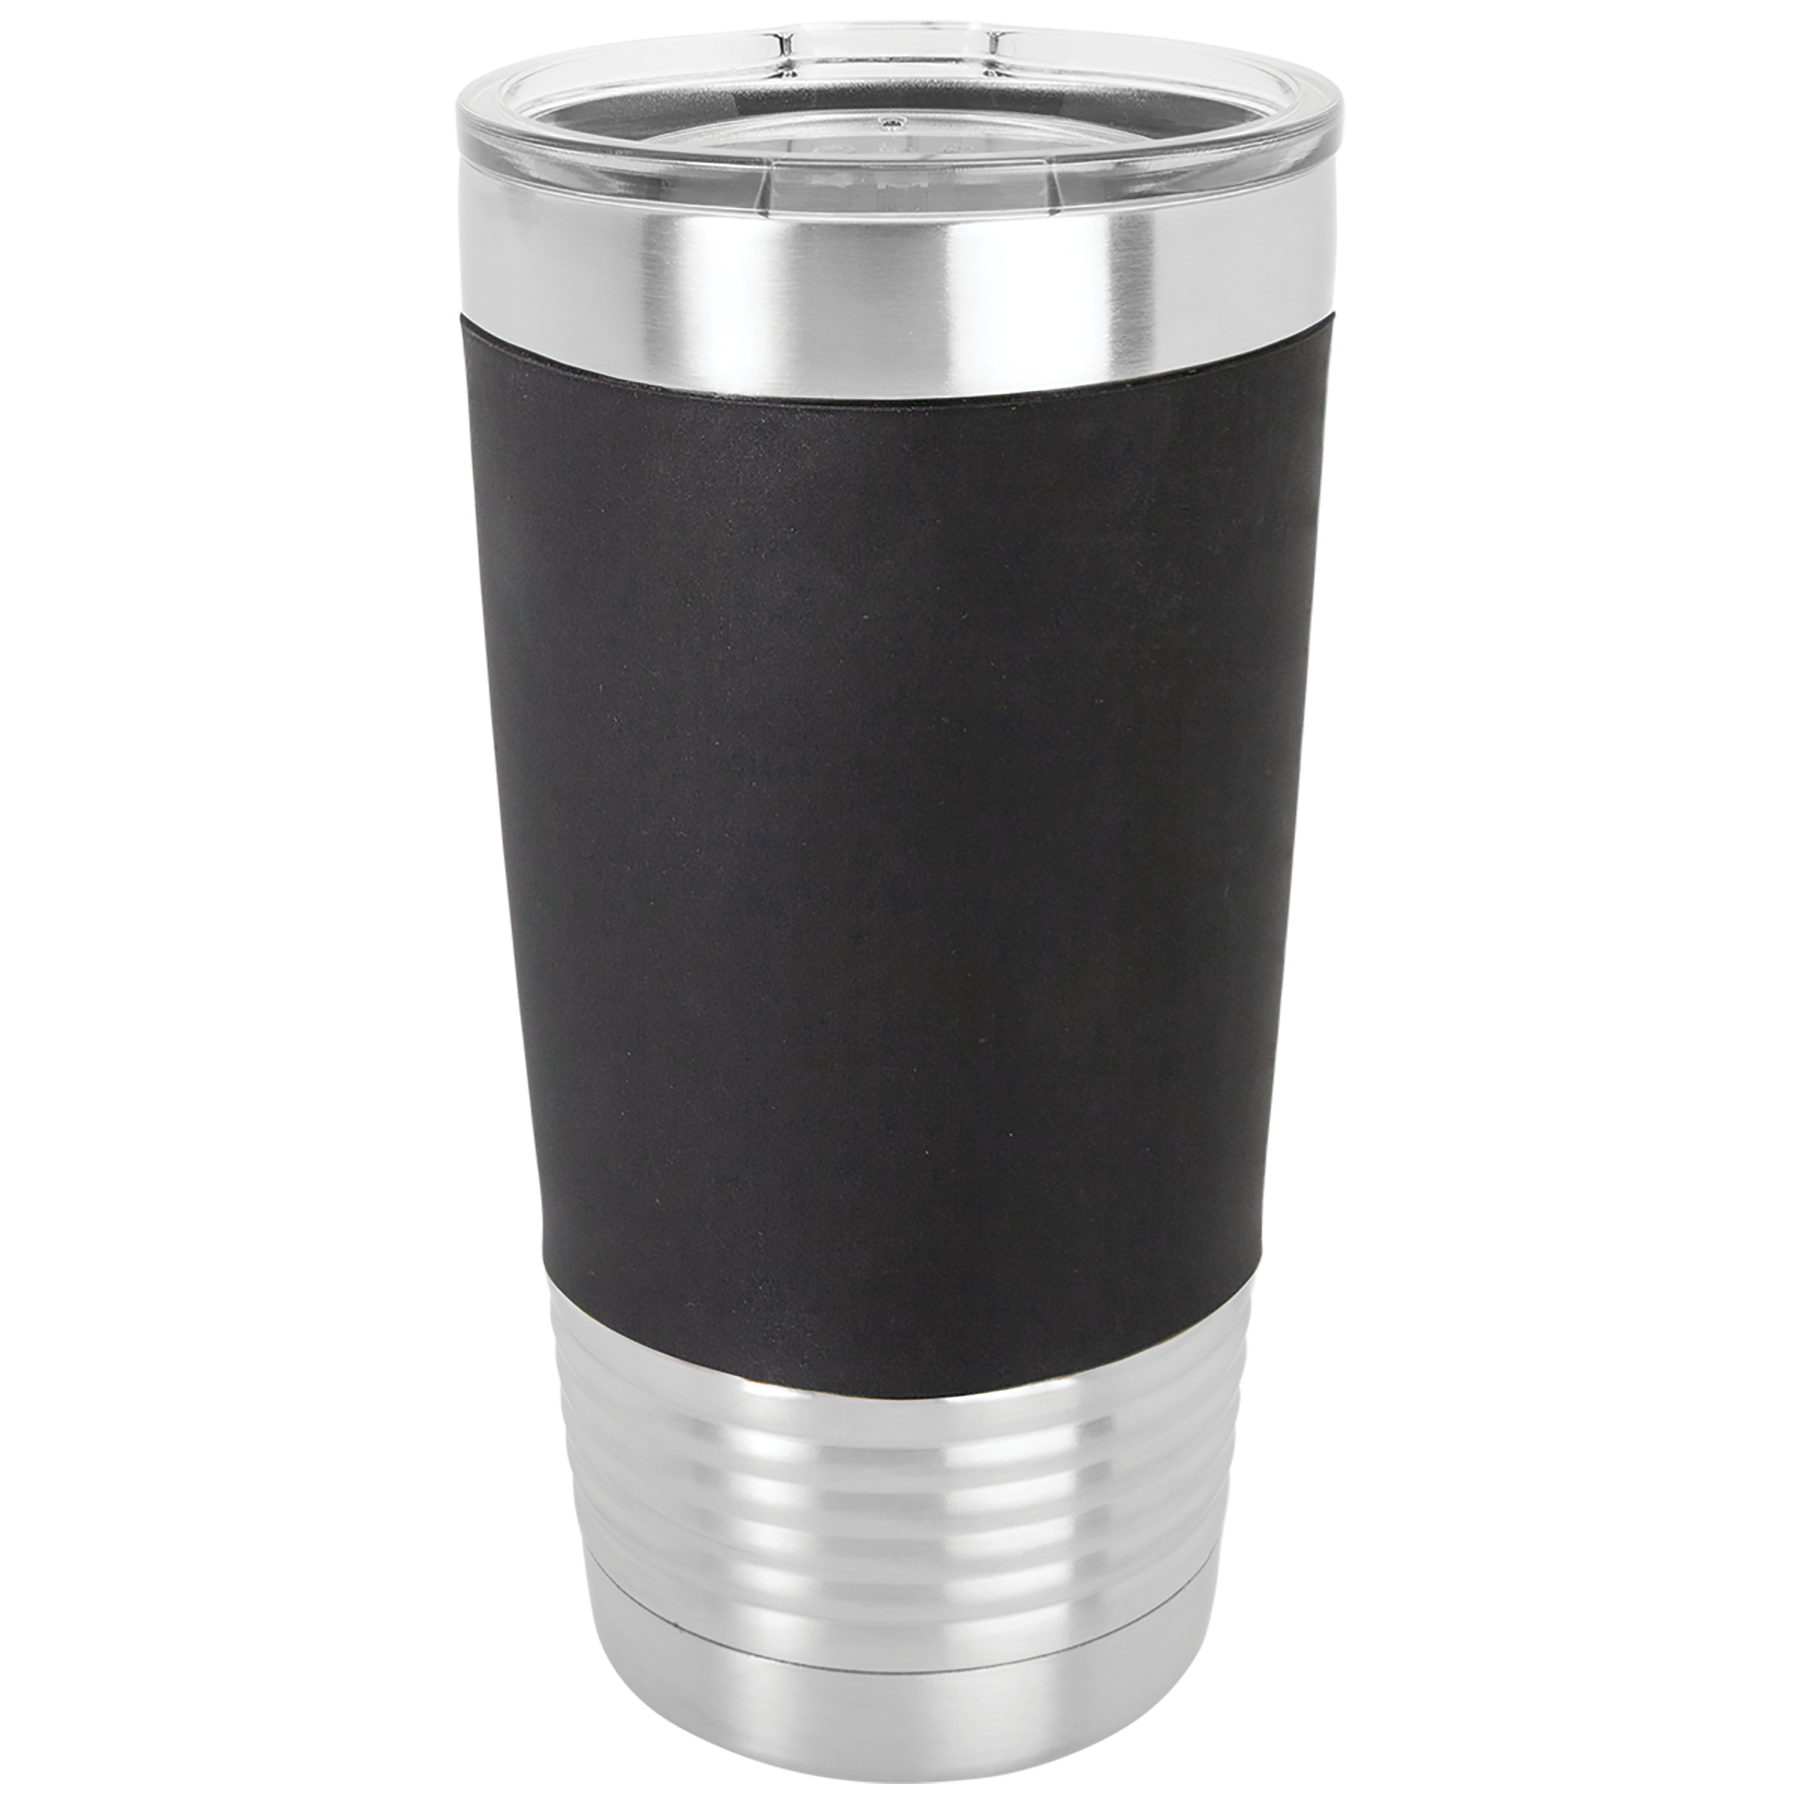 Black Engraves to White 20oz Silicone Grip Tumbler -One Free Engraving   -Double-wall Vacuum Insulated  -Made from 18/8 Gauge Stainless Steel (Type 304 Food Grade)  -Lid is BPA Free (Hand Wash Only)  -Not recommended for Dishwasher  -Silicone Sleeve is Removable  -Works with Cold and Hot Drinks  -7 Color Options  -Perfect for Personalized Gifts, Awards, Incentives, Swag & Fundraisers